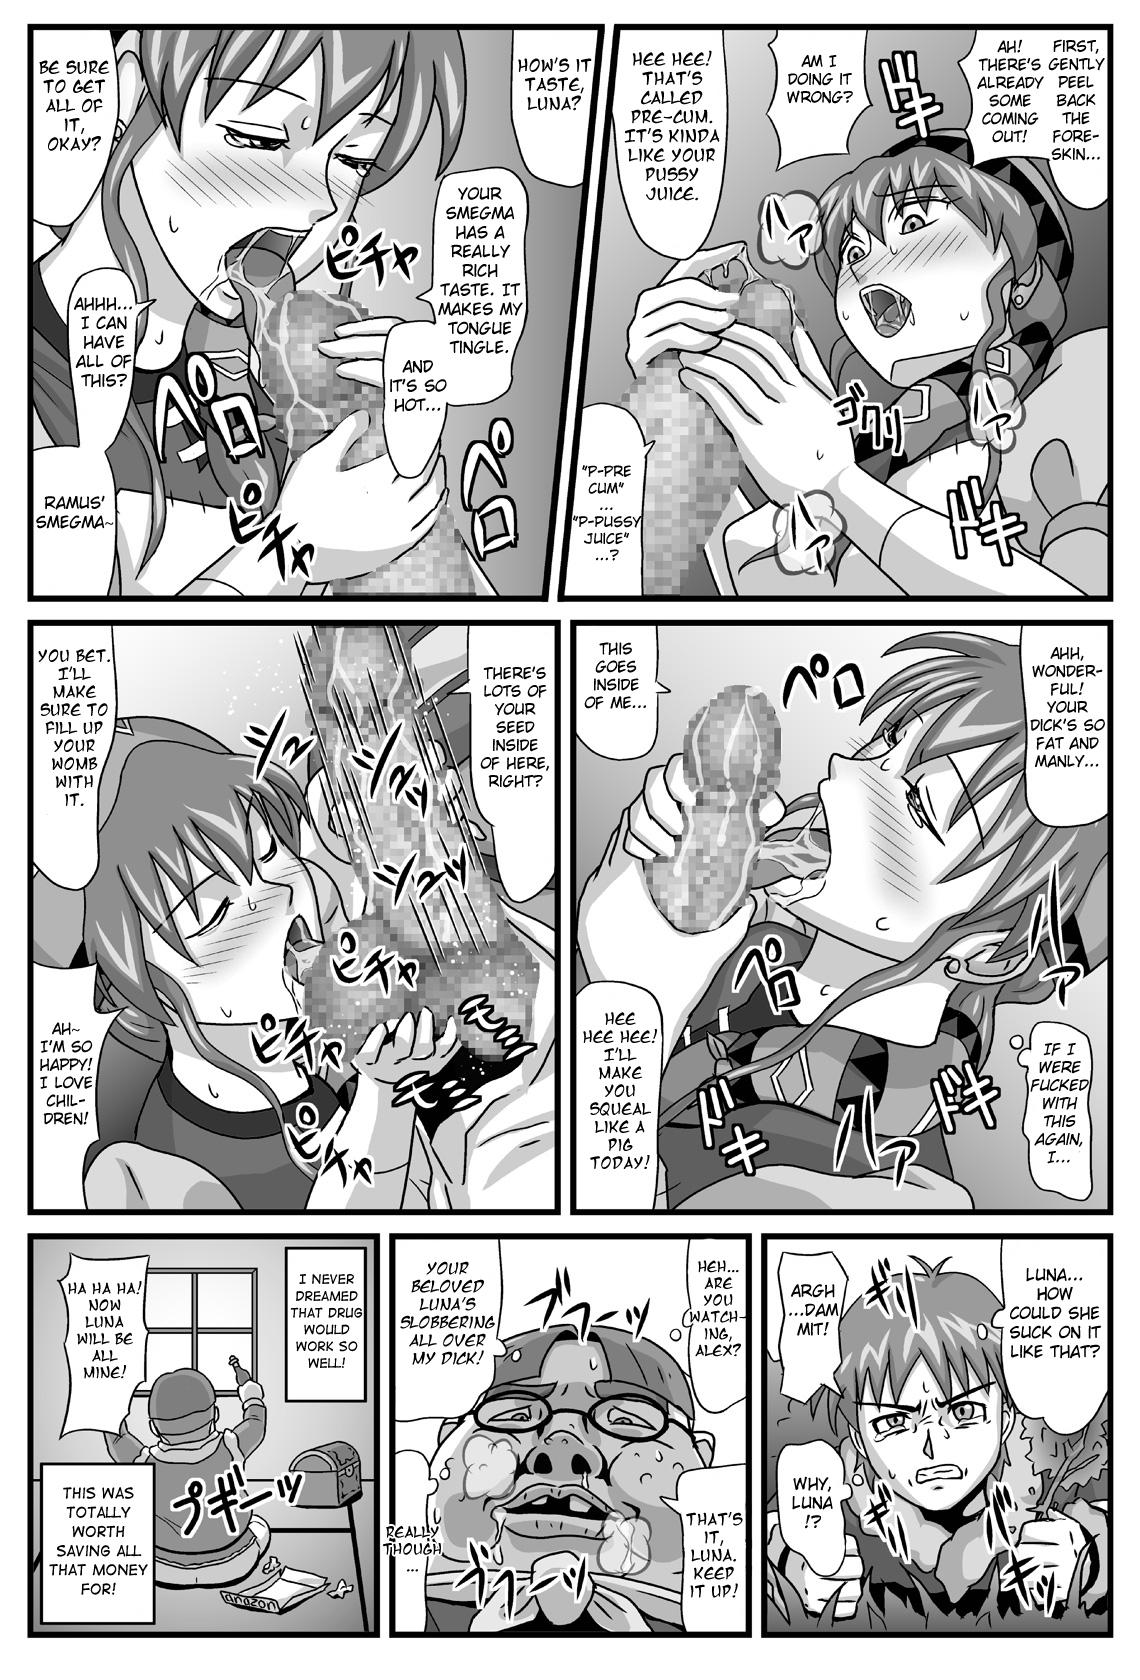 Lolicon The Cumdumpster Princess of Burg 01 - Lunar silver star story Thot - Page 7